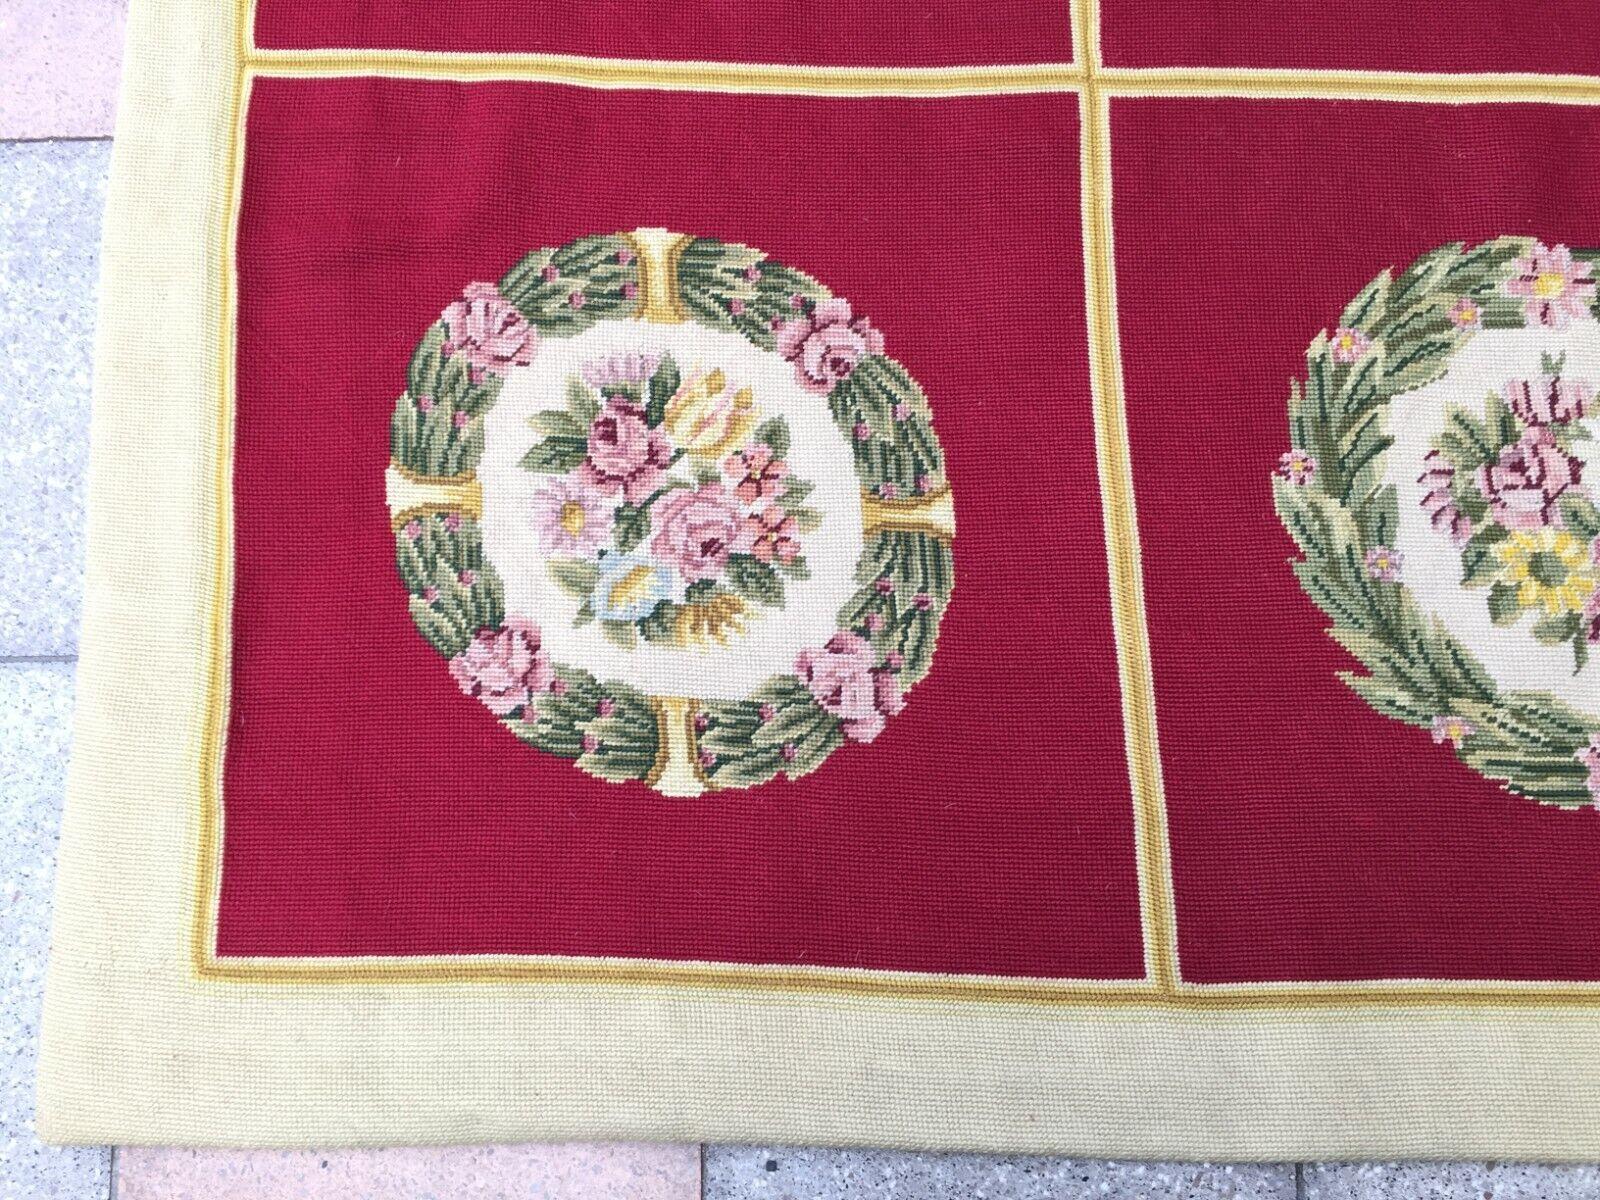 Handmade Vintage French Needlepoint Rug 3.8' x 5.4', 1960s - 1W09 In Good Condition For Sale In Bordeaux, FR